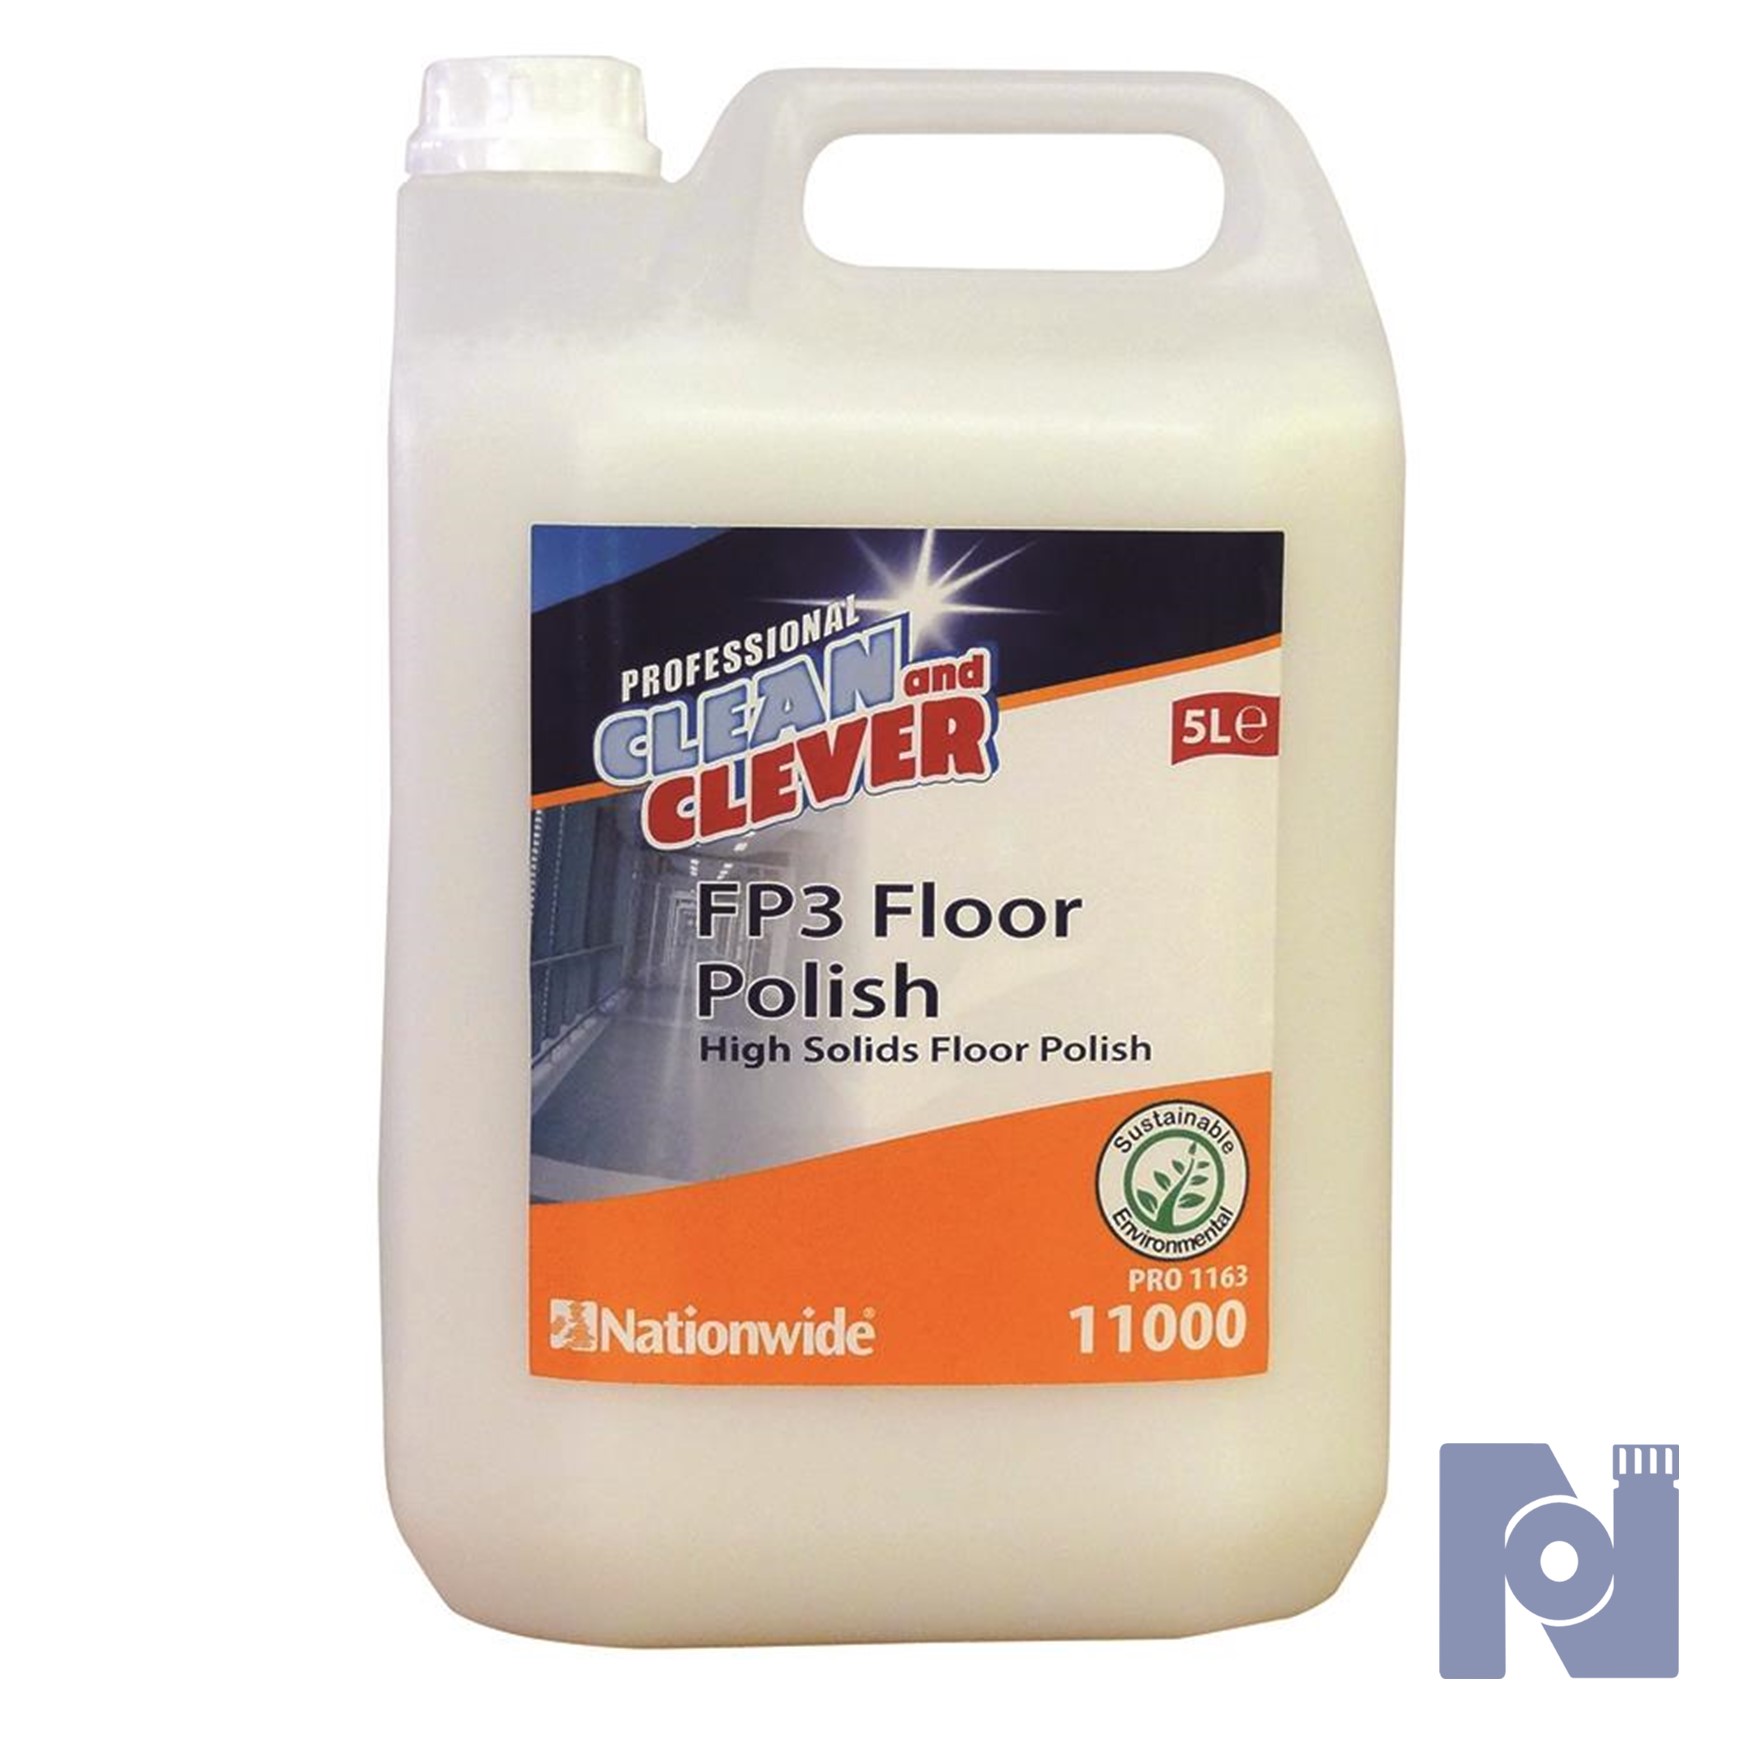 Clean & Clever FP3 Floor Polish